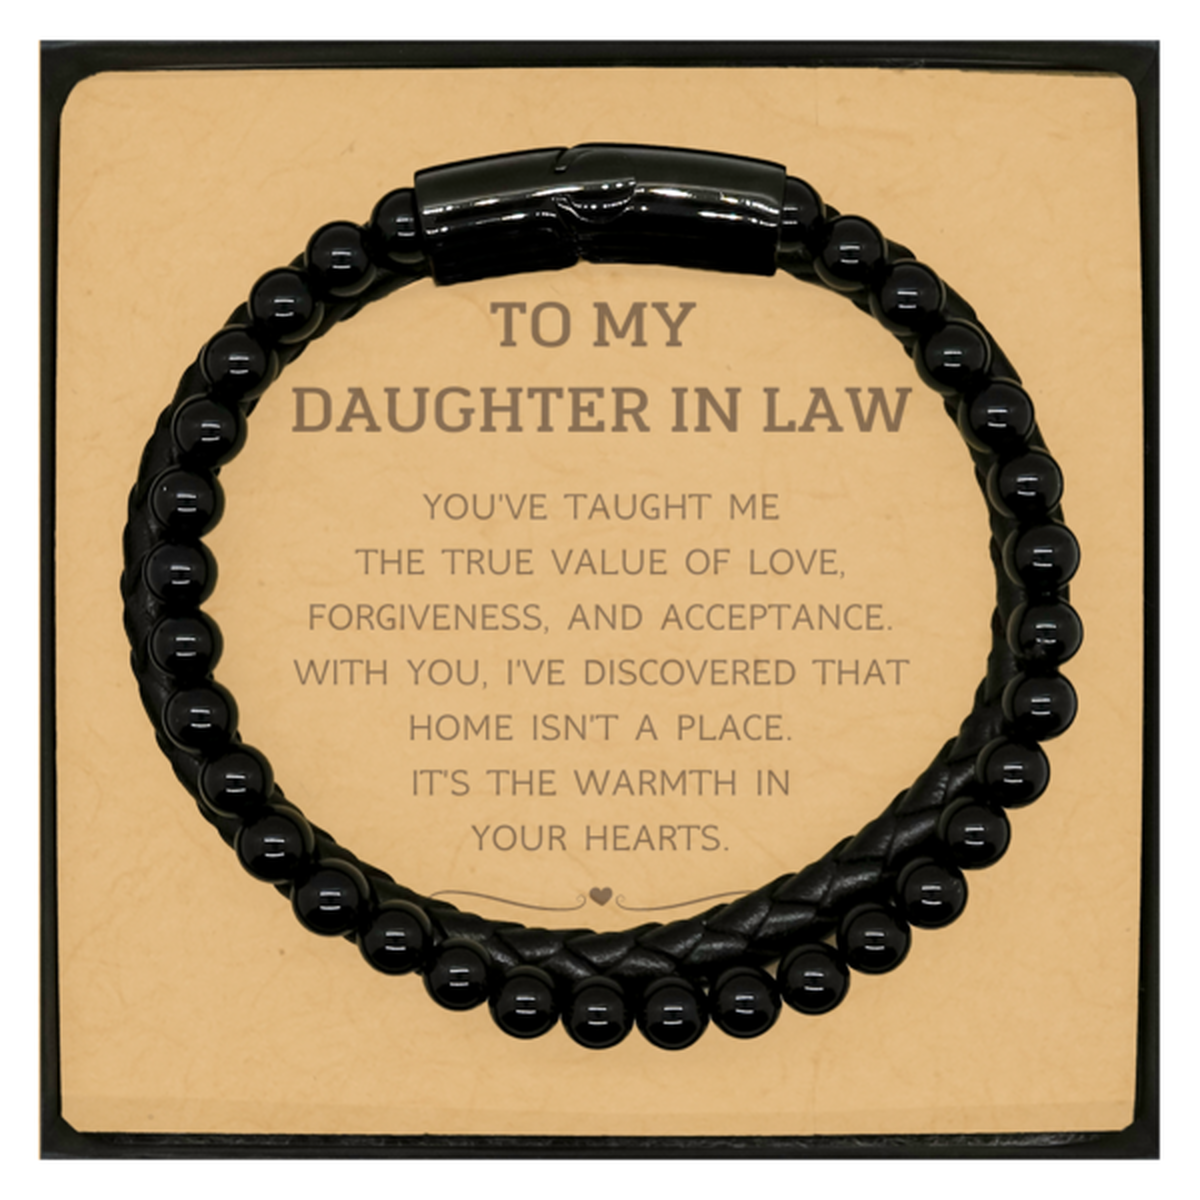 To My Daughter In Law Gifts, You've taught me the true value of love, Thank You Gifts For Daughter In Law, Birthday Christmas Stone Leather Bracelets For Daughter In Law